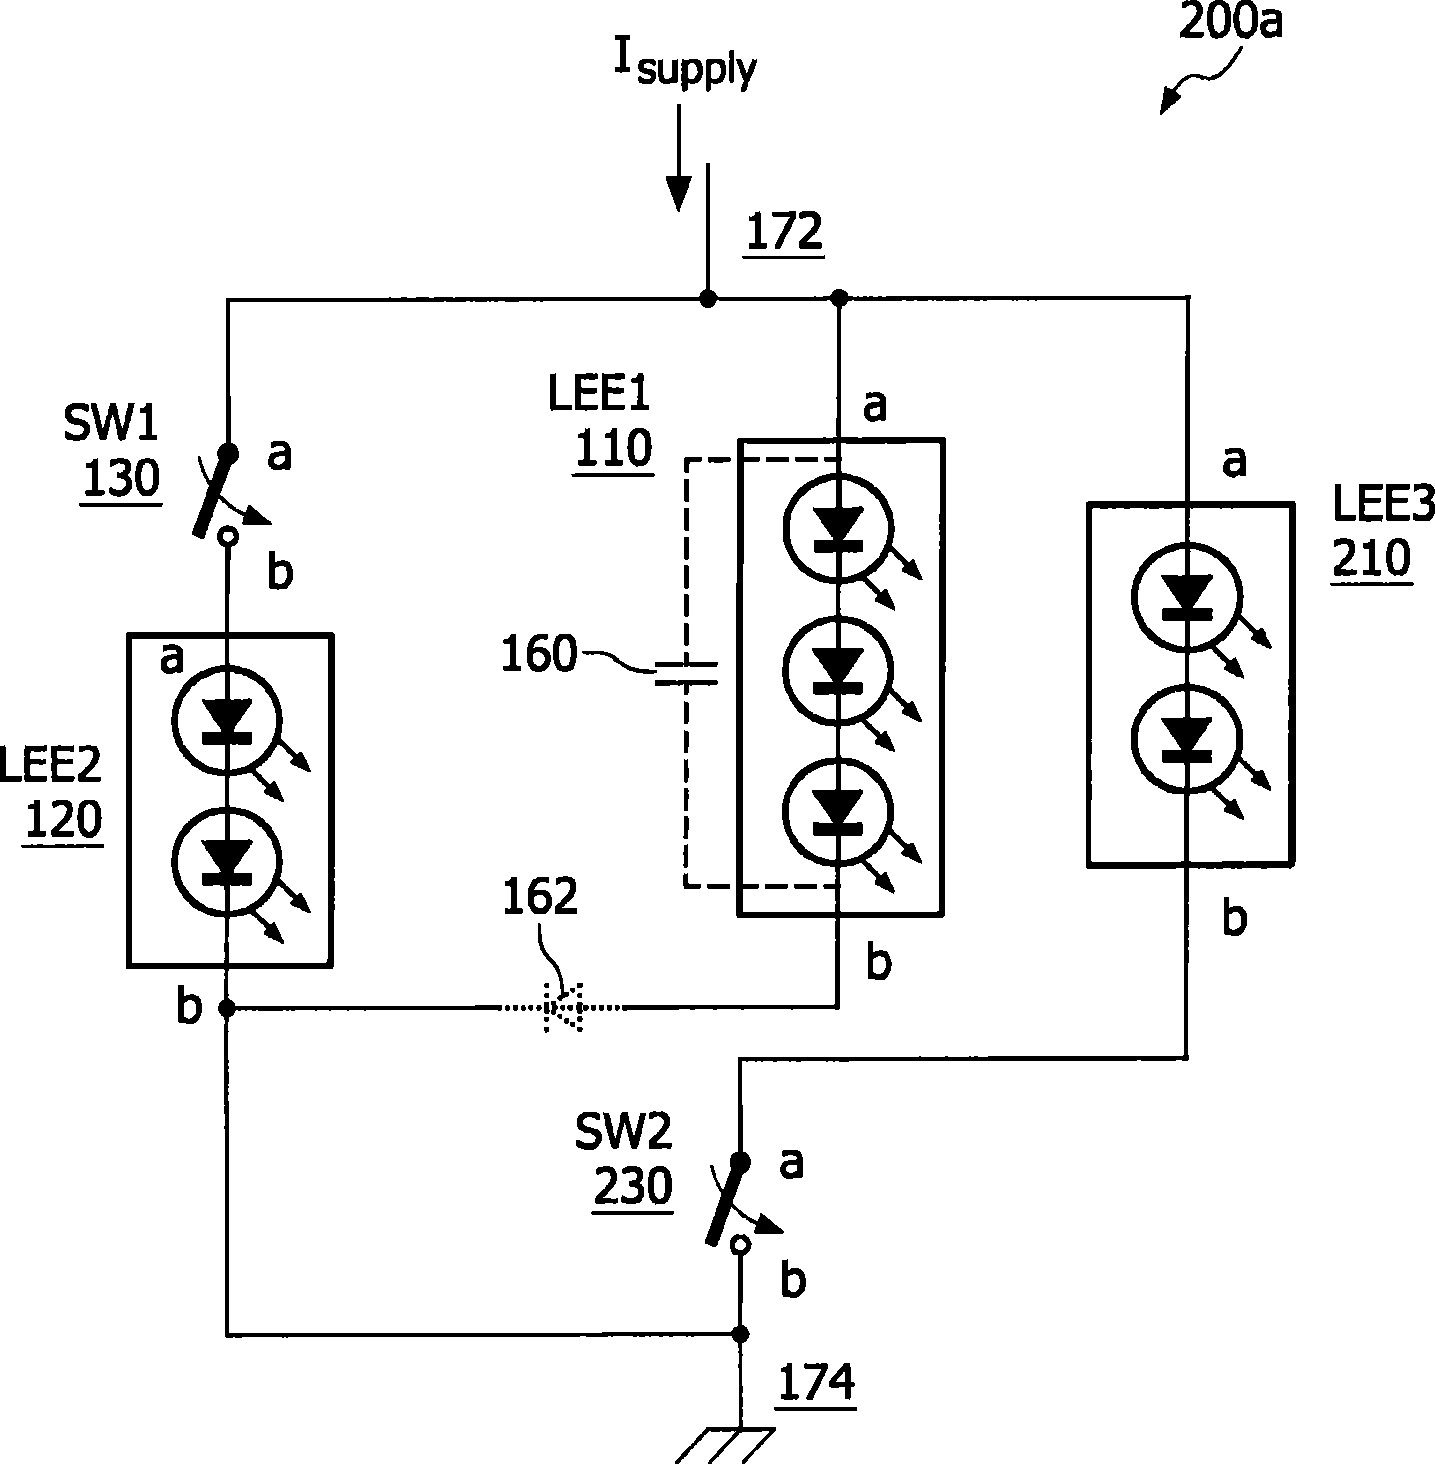 A switched light element array and method of operation